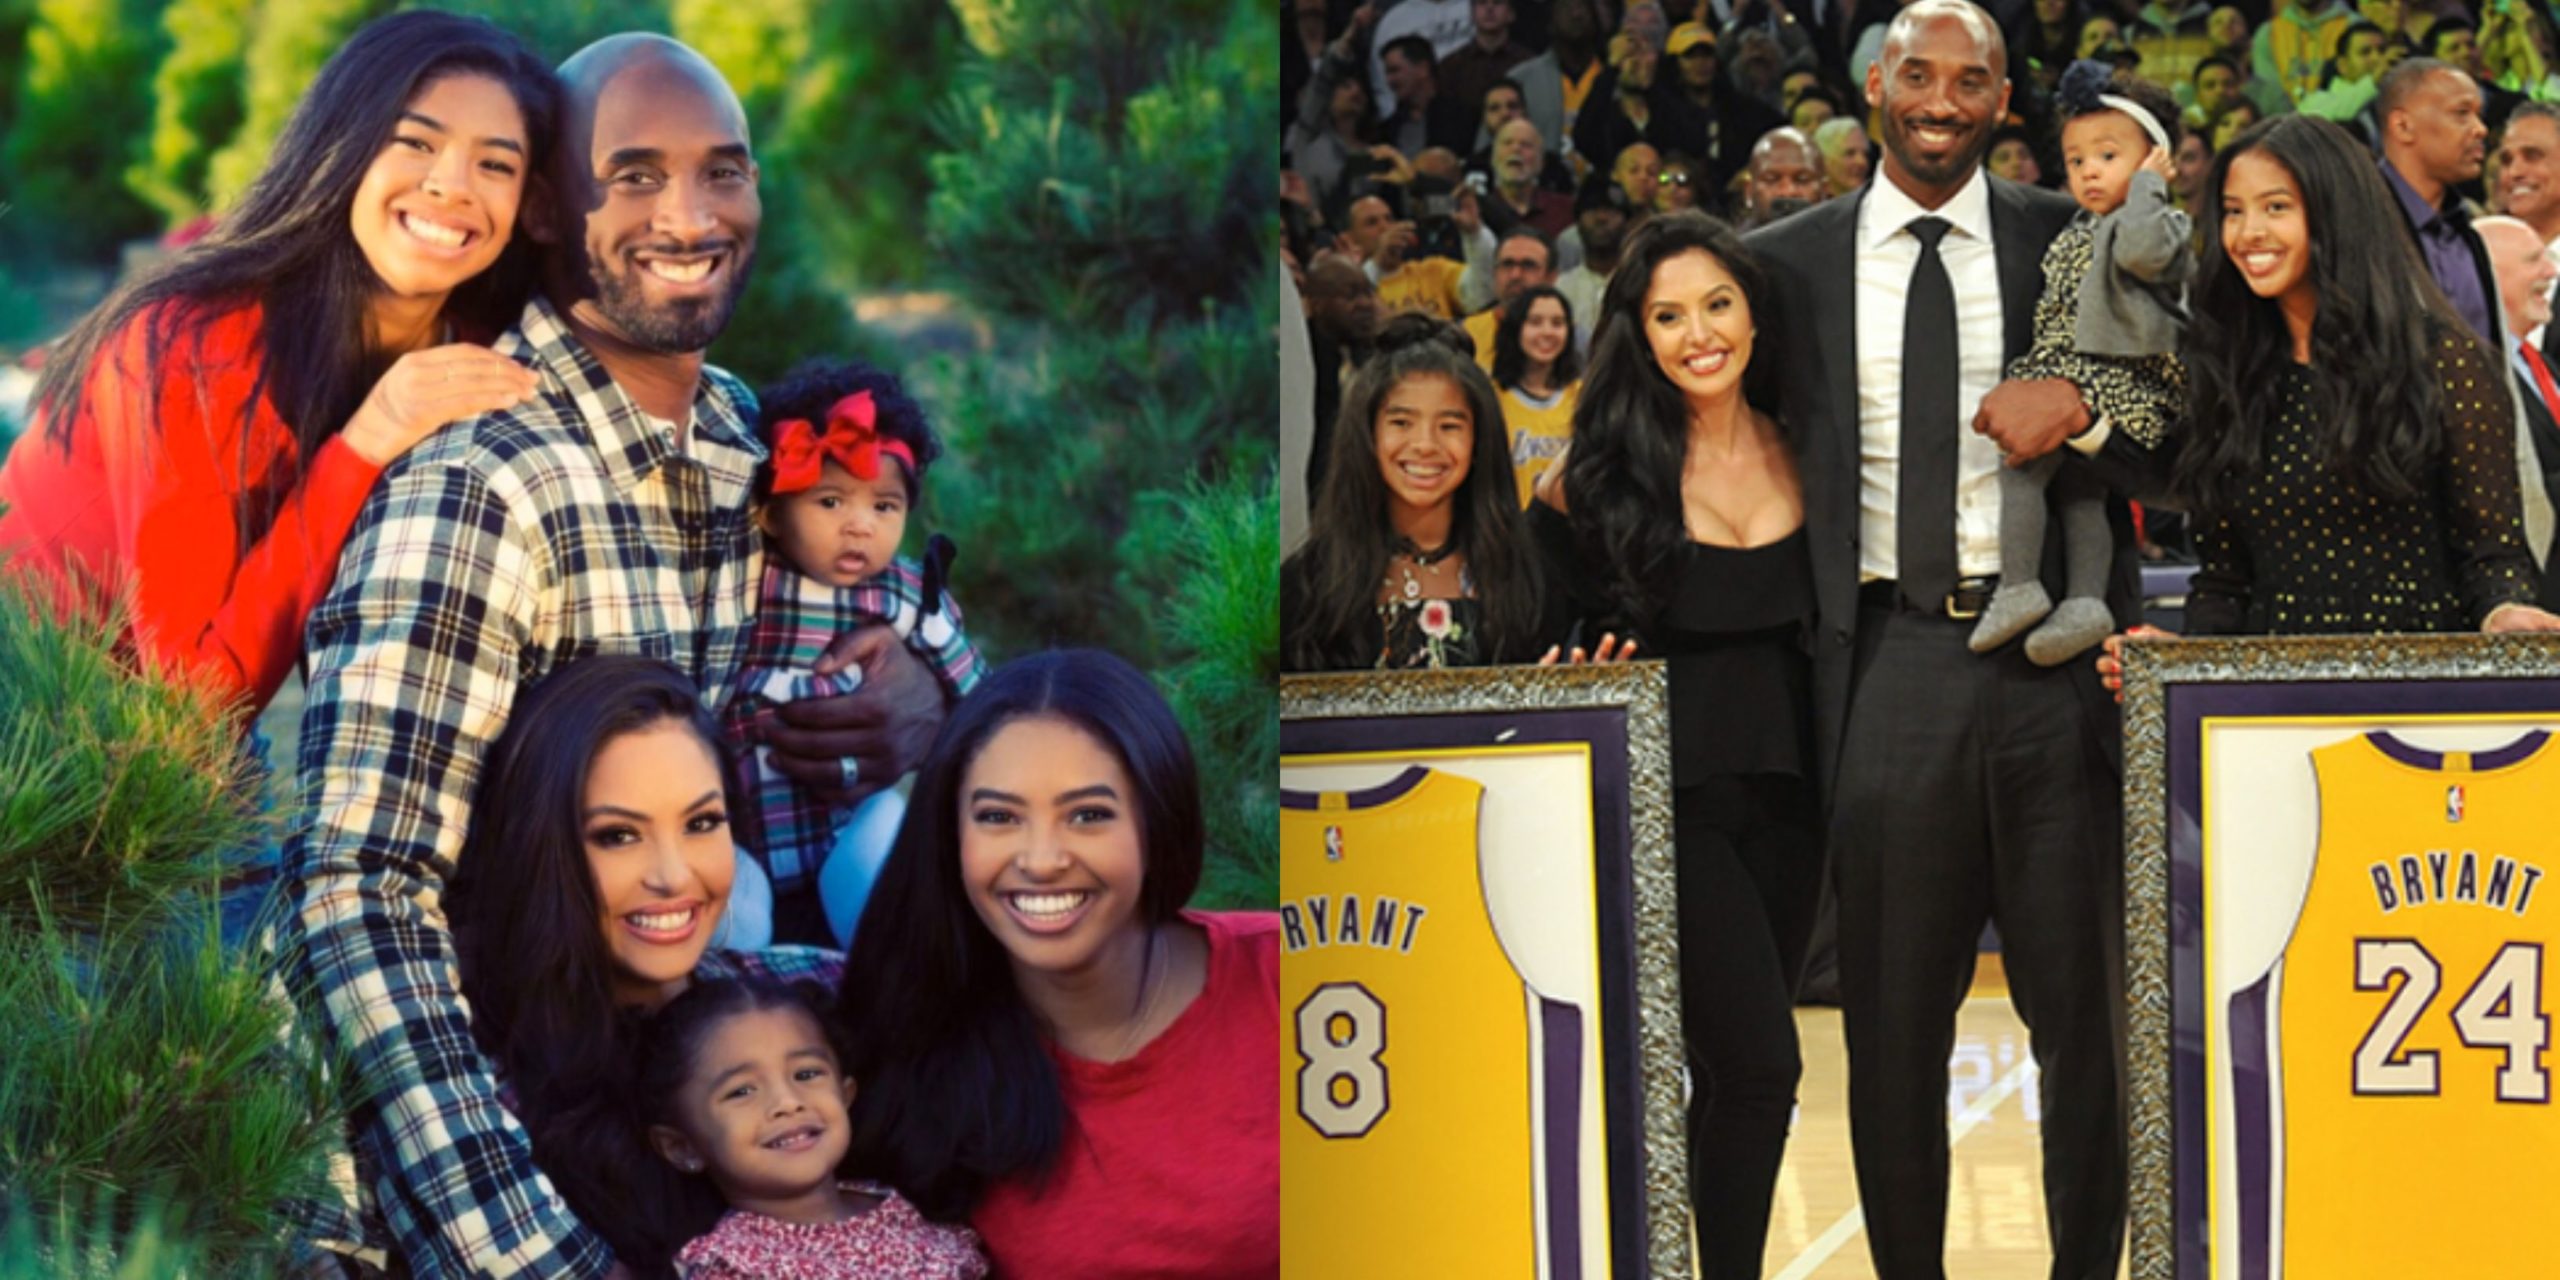 No words can describe my pain- Kobe Bryants wife, Vanessa Bryant pays tribute to husband and daughter